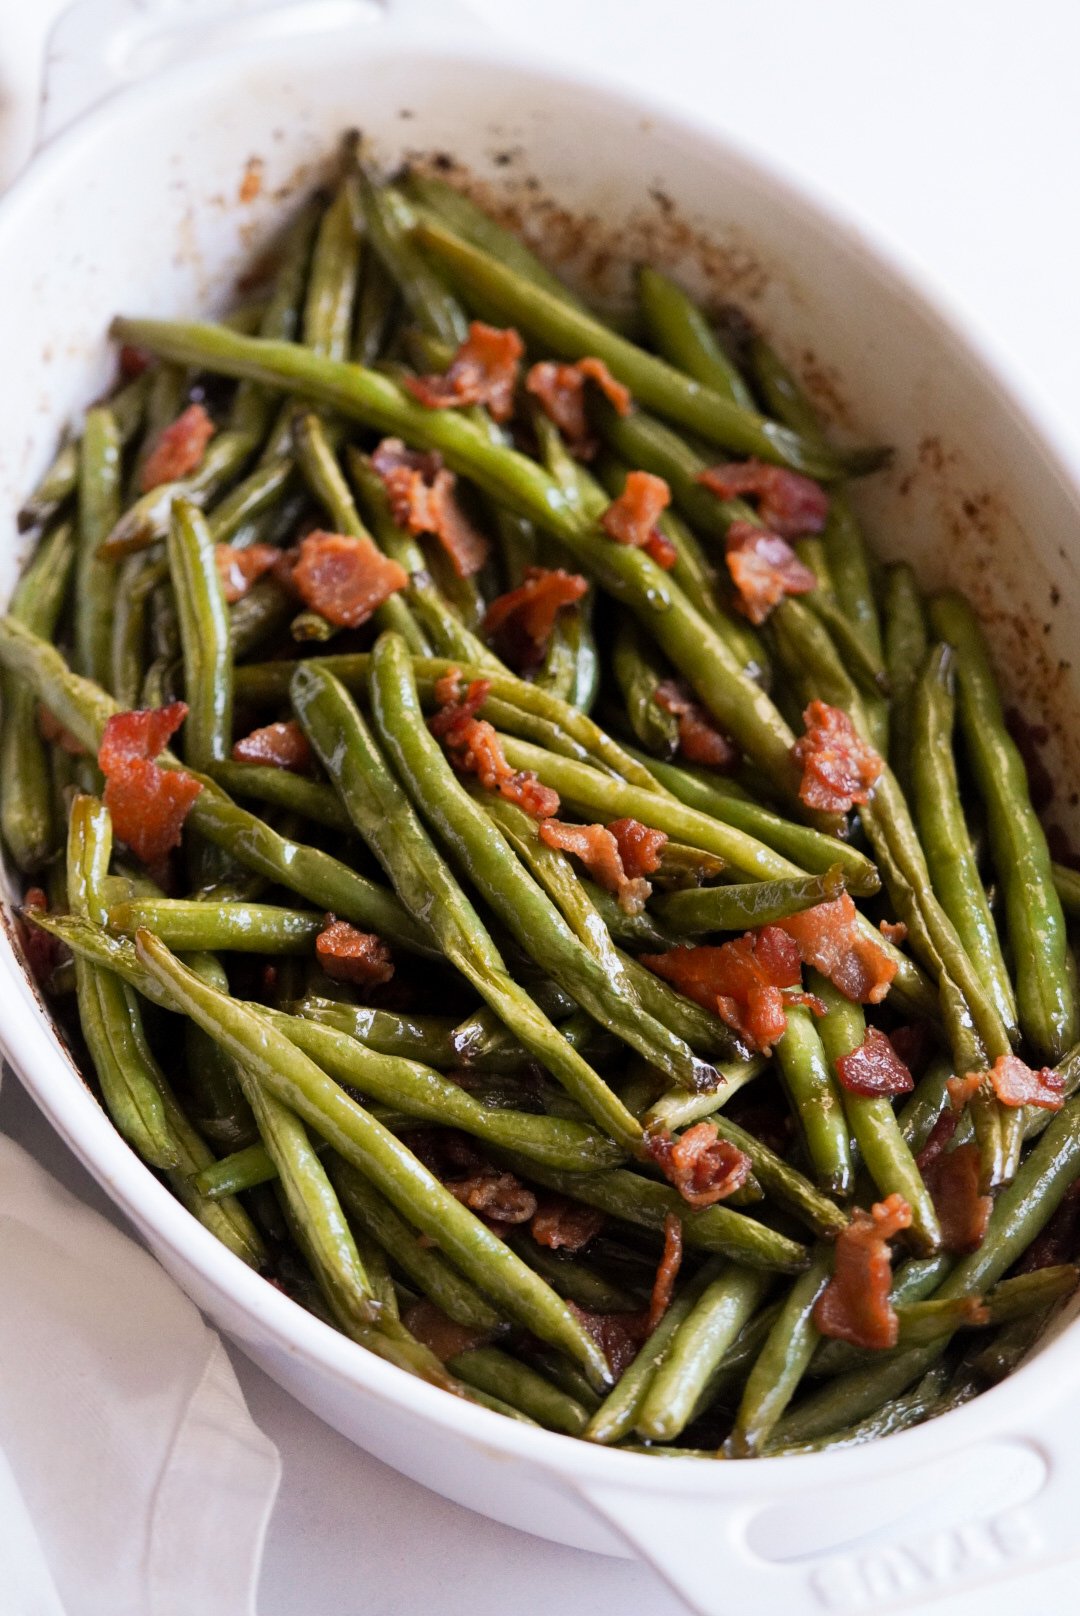 baked crack green beans in a casserole dish